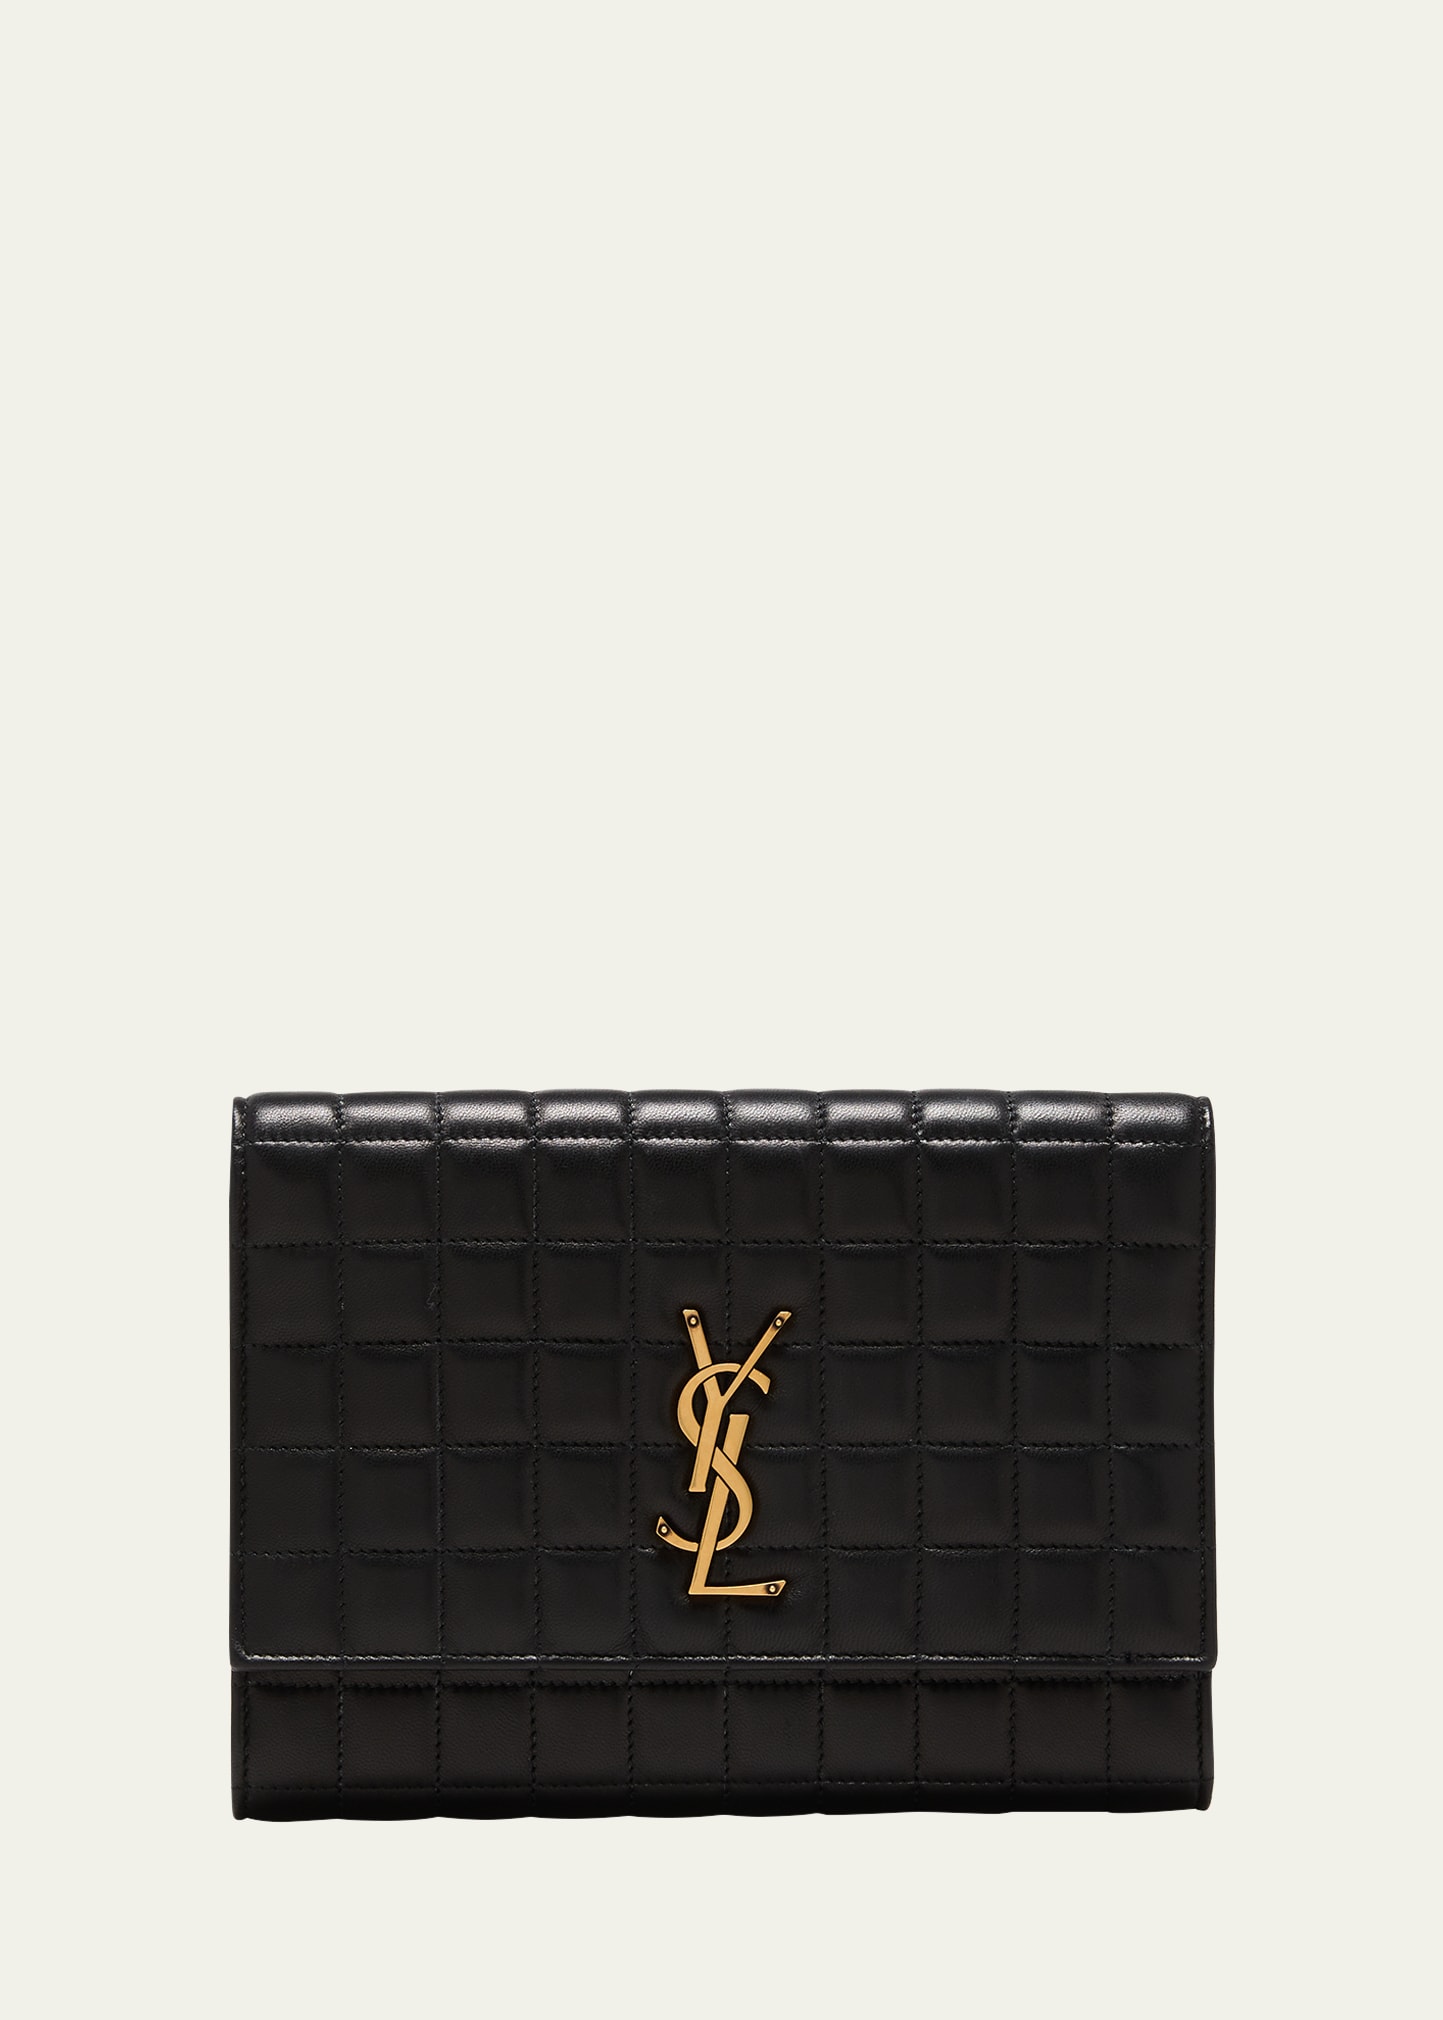 YSL Monogram Flap Clutch Bag in Quilted Smooth Leather